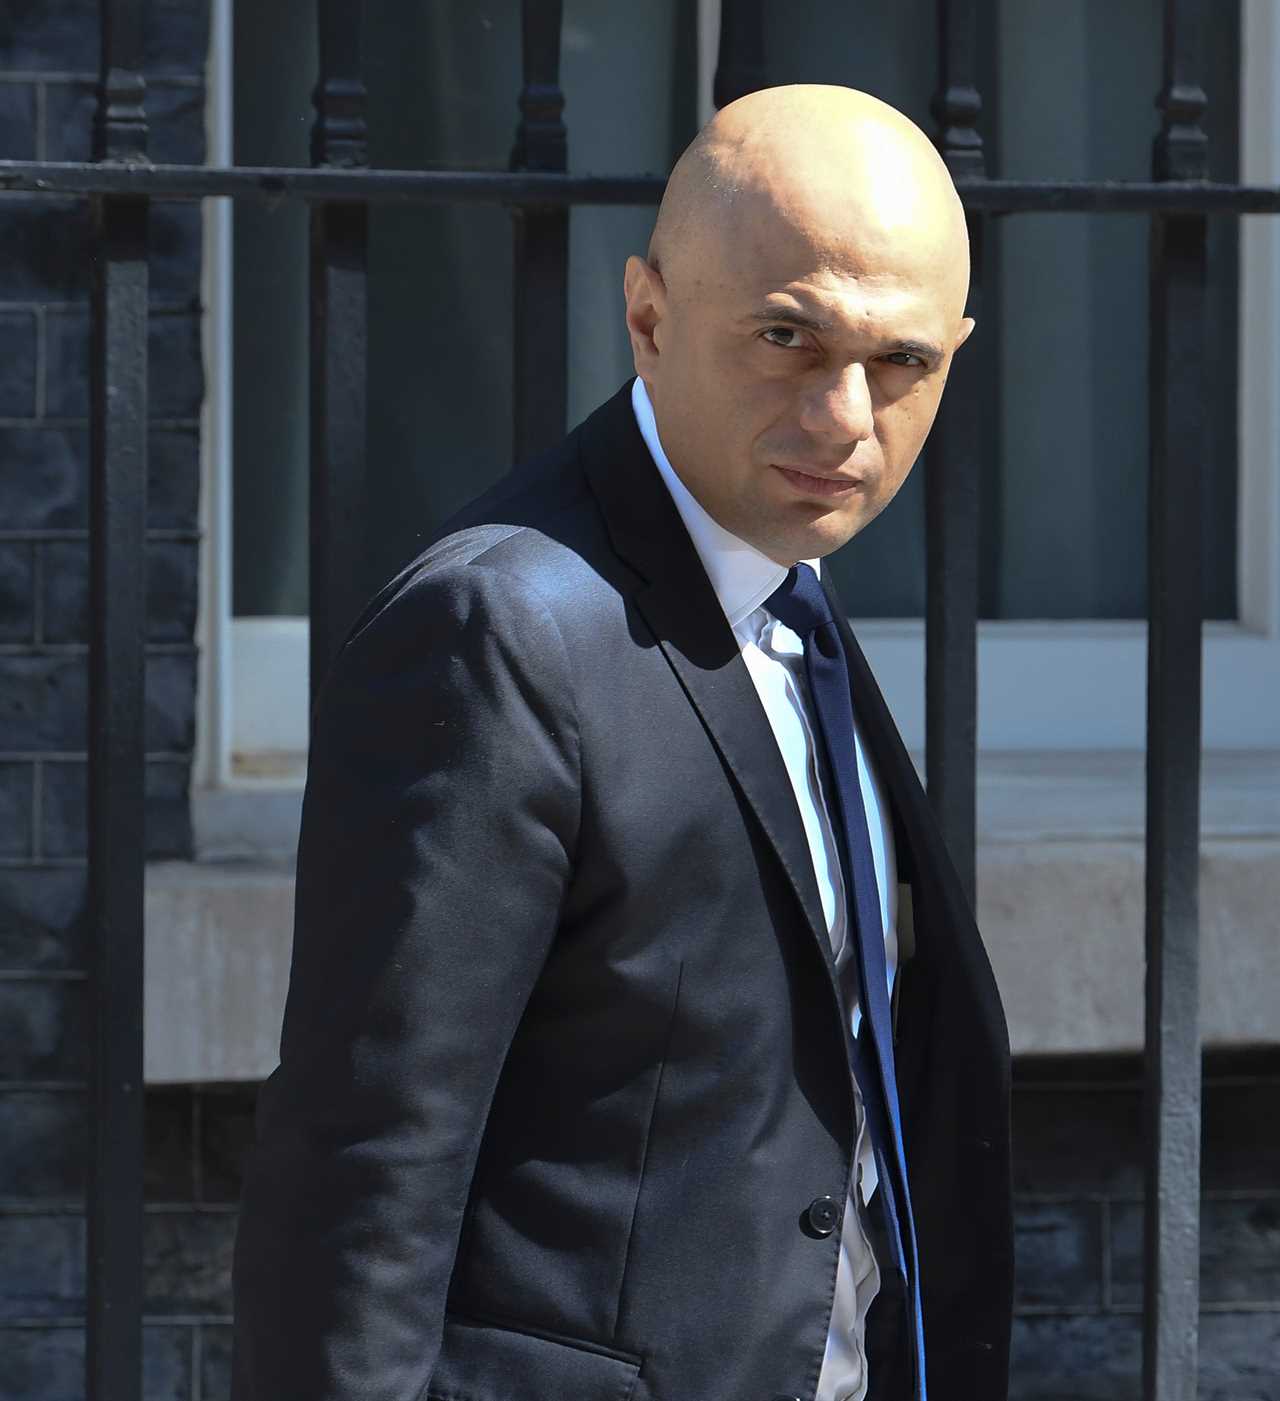 The Health Secretary was pictured leaving No10 Downing Street yesterday